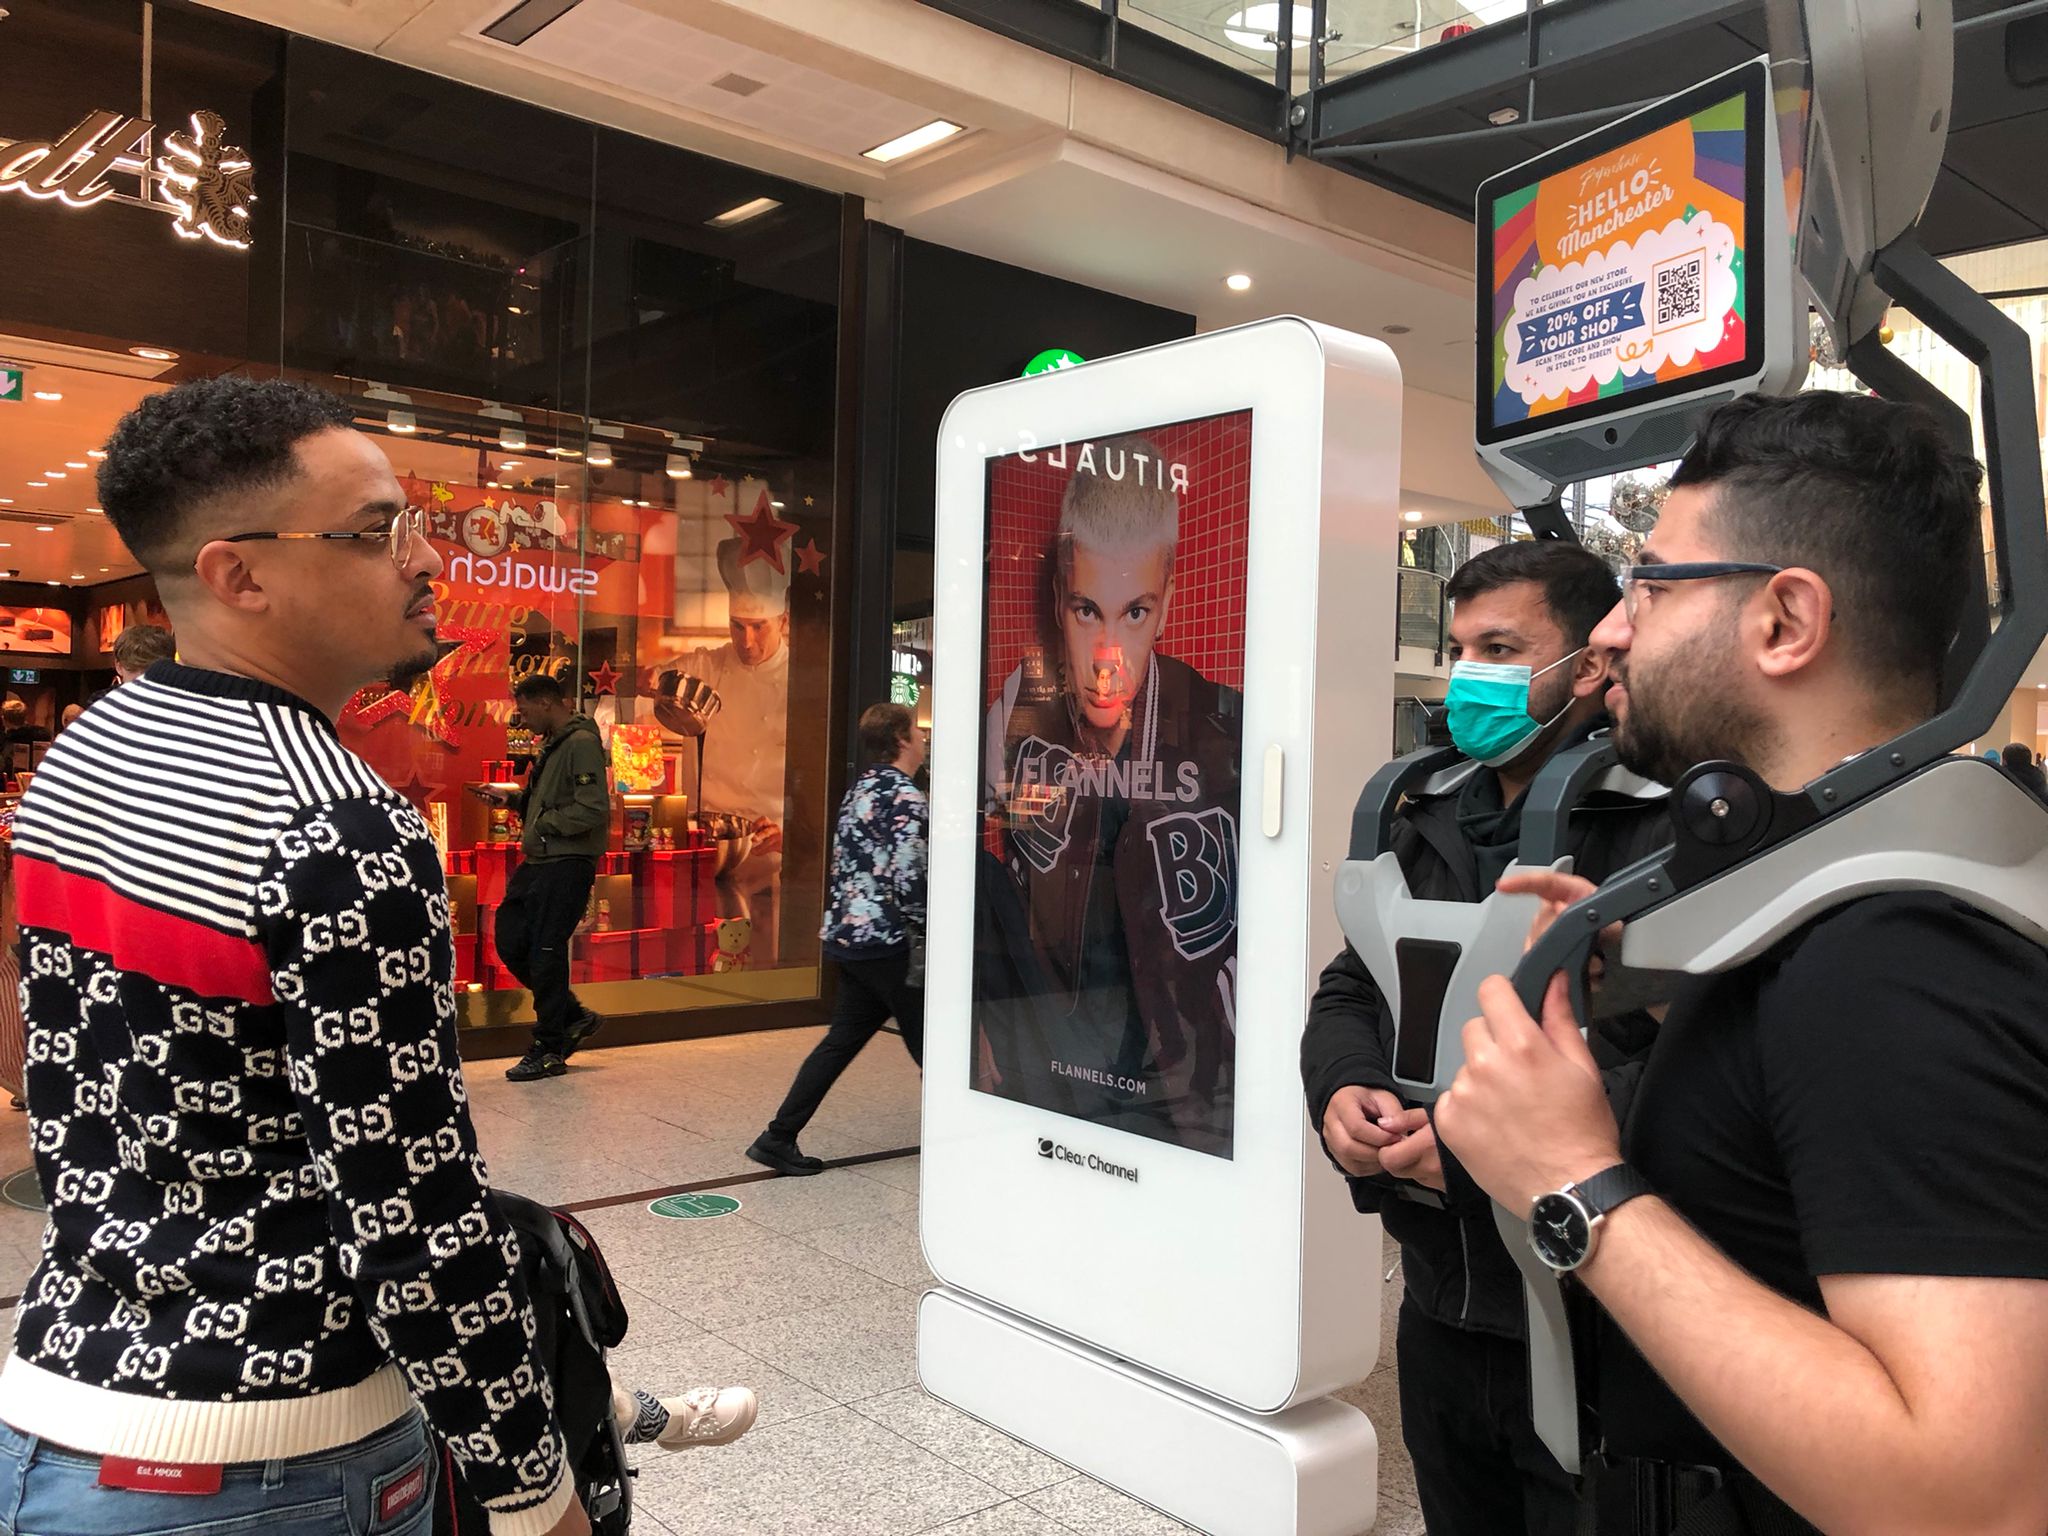 ad walkers speaking with man in shopping mall